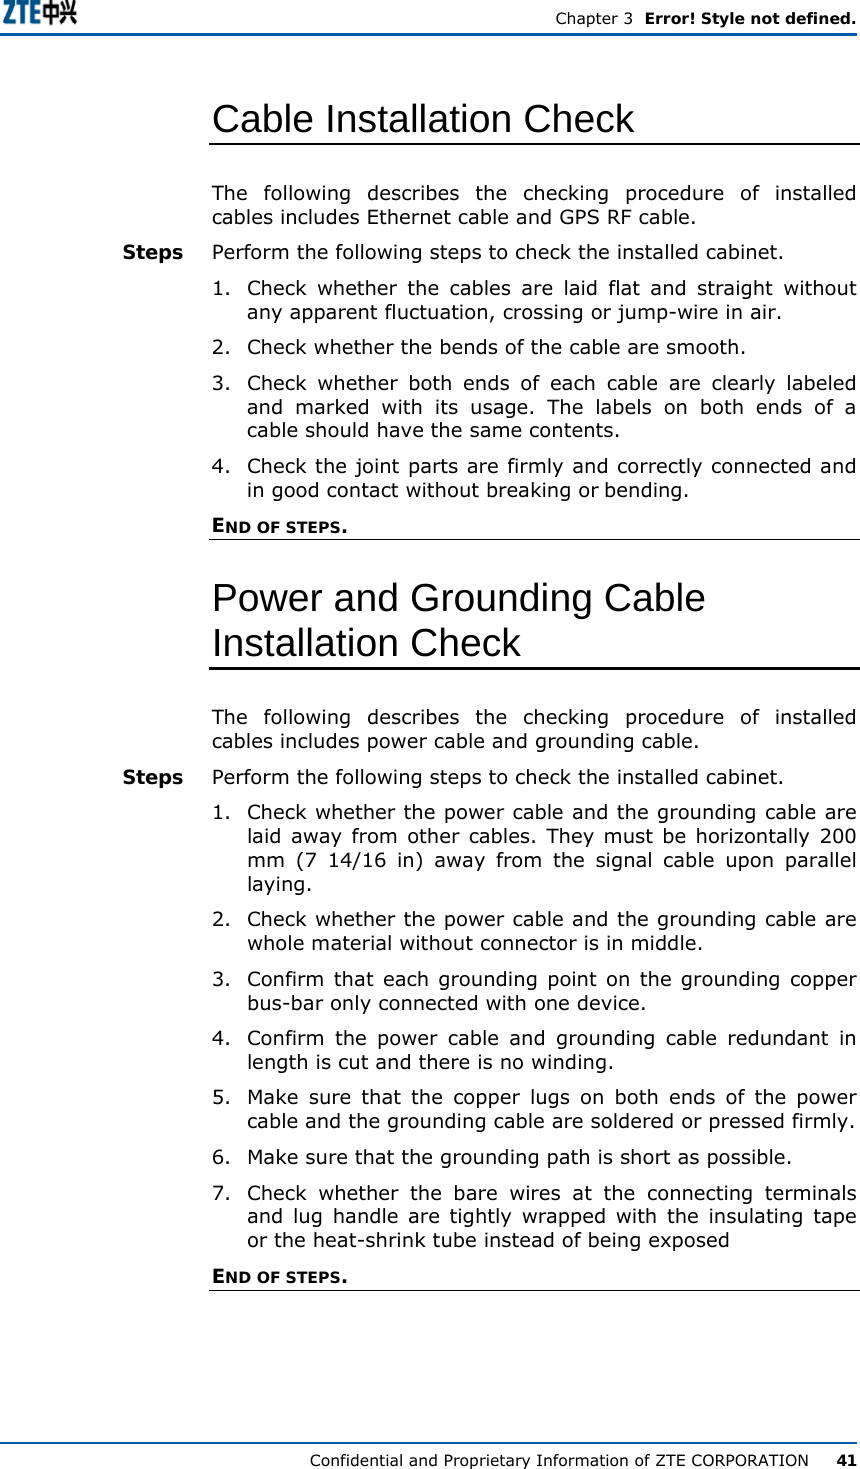  Chapter 3  Error! Style not defined. Confidential and Proprietary Information of ZTE CORPORATION      41 Cable Installation Check The following describes the checking procedure of installed cables includes Ethernet cable and GPS RF cable. Perform the following steps to check the installed cabinet. 1.  Check whether the cables are laid flat and straight without any apparent fluctuation, crossing or jump-wire in air.  2.  Check whether the bends of the cable are smooth.  3.  Check whether both ends of each cable are clearly labeled and marked with its usage. The labels on both ends of a cable should have the same contents. 4.  Check the joint parts are firmly and correctly connected and in good contact without breaking or bending.  END OF STEPS. Power and Grounding Cable Installation Check The following describes the checking procedure of installed cables includes power cable and grounding cable. Perform the following steps to check the installed cabinet. 1.  Check whether the power cable and the grounding cable are laid away from other cables. They must be horizontally 200 mm (7 14/16 in) away from the signal cable upon parallel laying.  2.  Check whether the power cable and the grounding cable are whole material without connector is in middle.  3.  Confirm that each grounding point on the grounding copper bus-bar only connected with one device. 4.  Confirm the power cable and grounding cable redundant in length is cut and there is no winding. 5.  Make sure that the copper lugs on both ends of the power cable and the grounding cable are soldered or pressed firmly. 6.  Make sure that the grounding path is short as possible.  7.  Check whether the bare wires at the connecting terminals and lug handle are tightly wrapped with the insulating tape or the heat-shrink tube instead of being exposed END OF STEPS. Steps Steps 